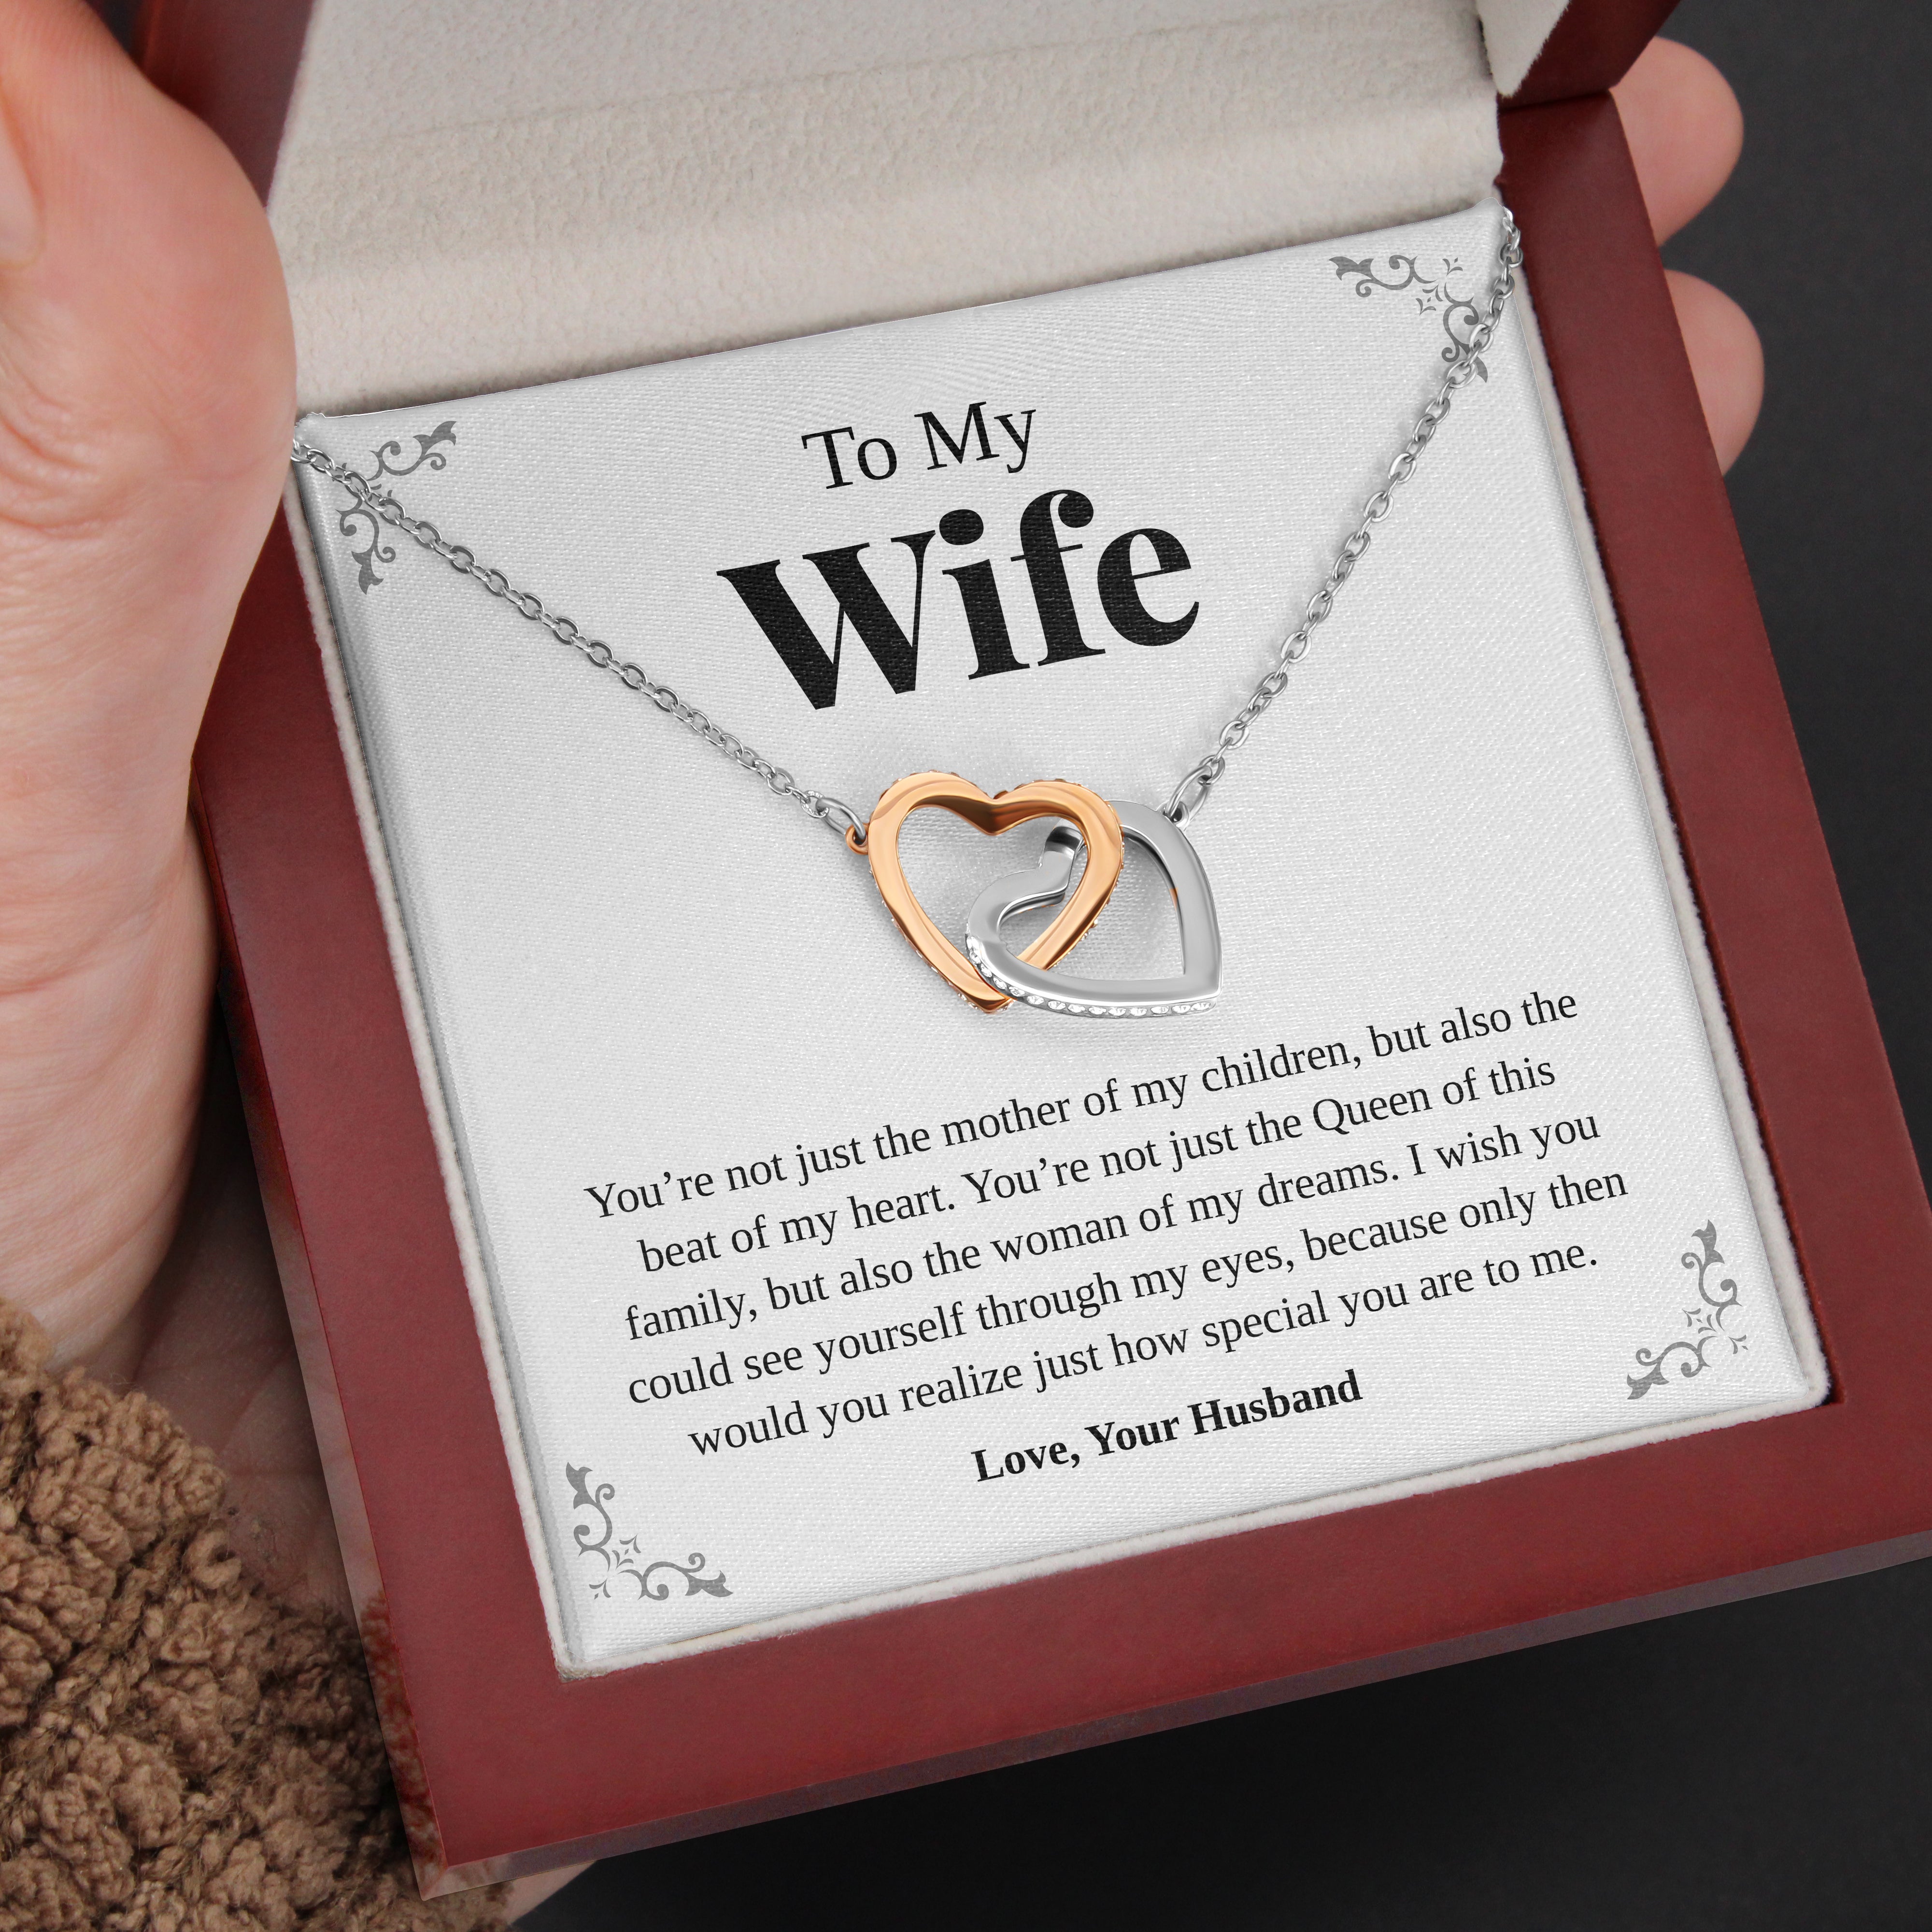 To My Wife | "Beat of My Heart" | Interlocking Hearts Necklace